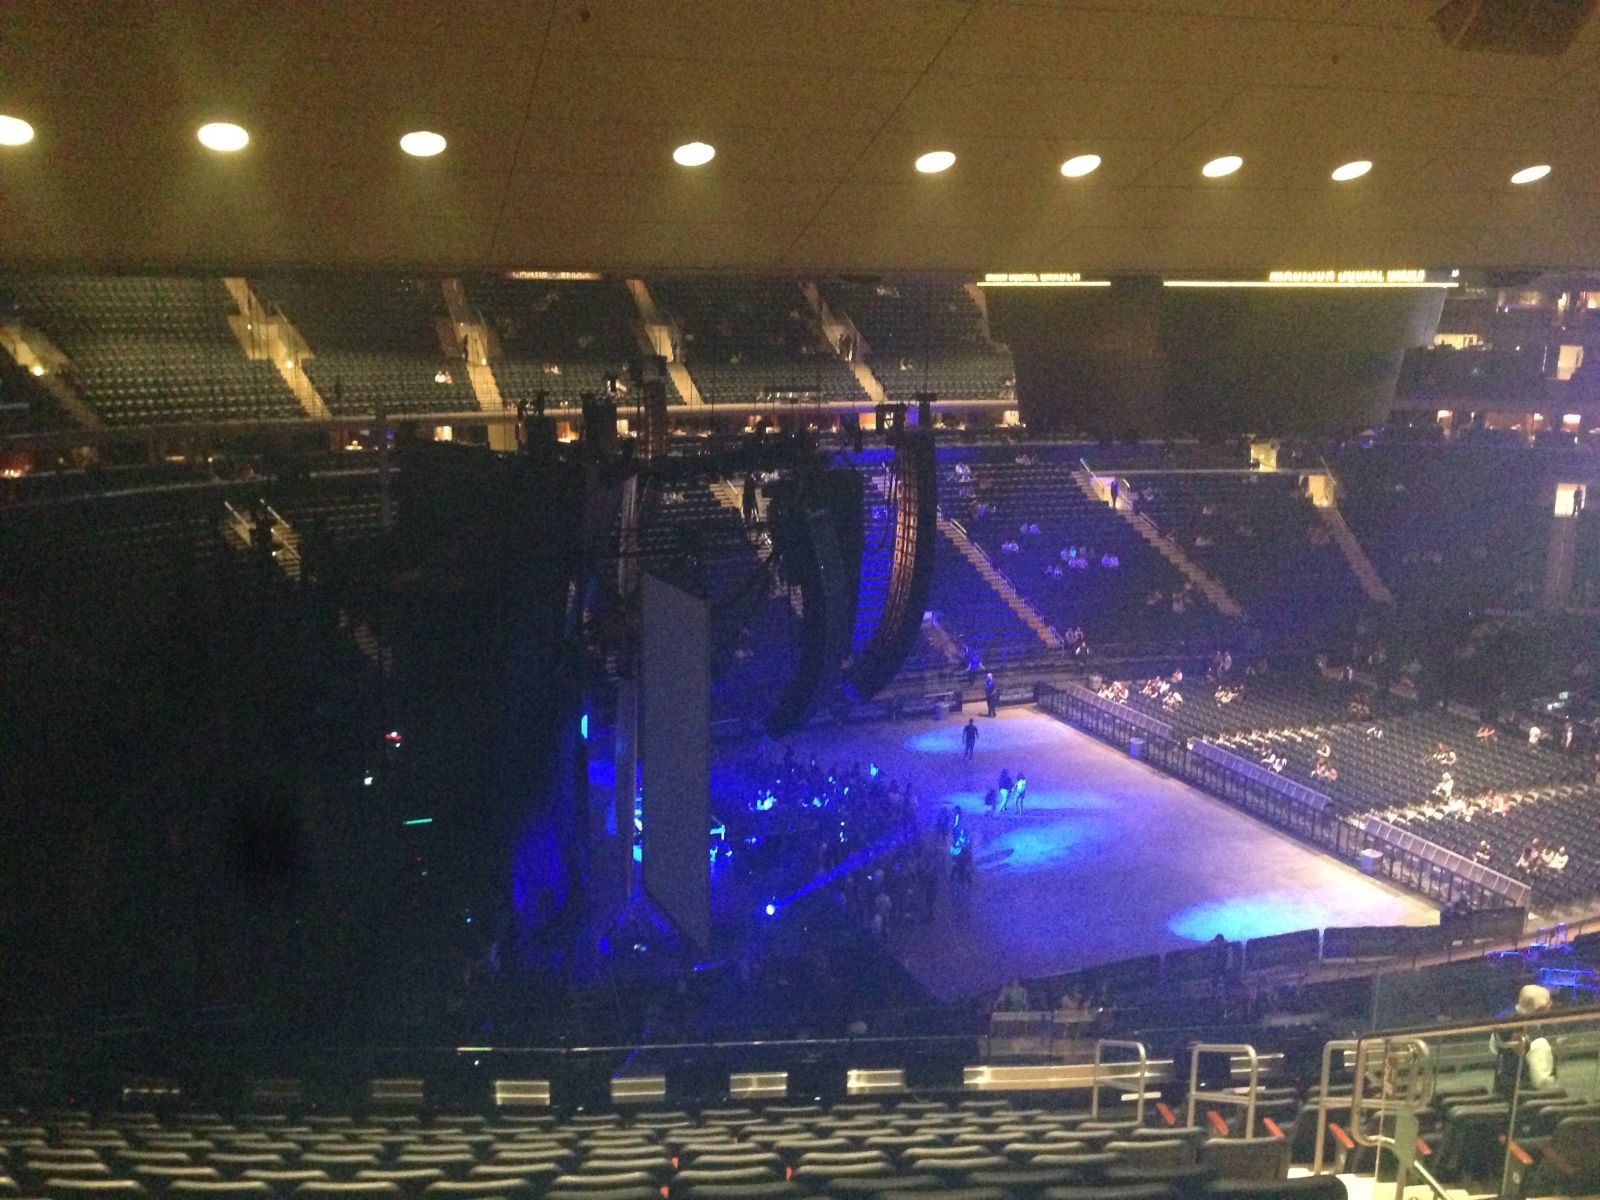 Section 221 At Madison Square Garden